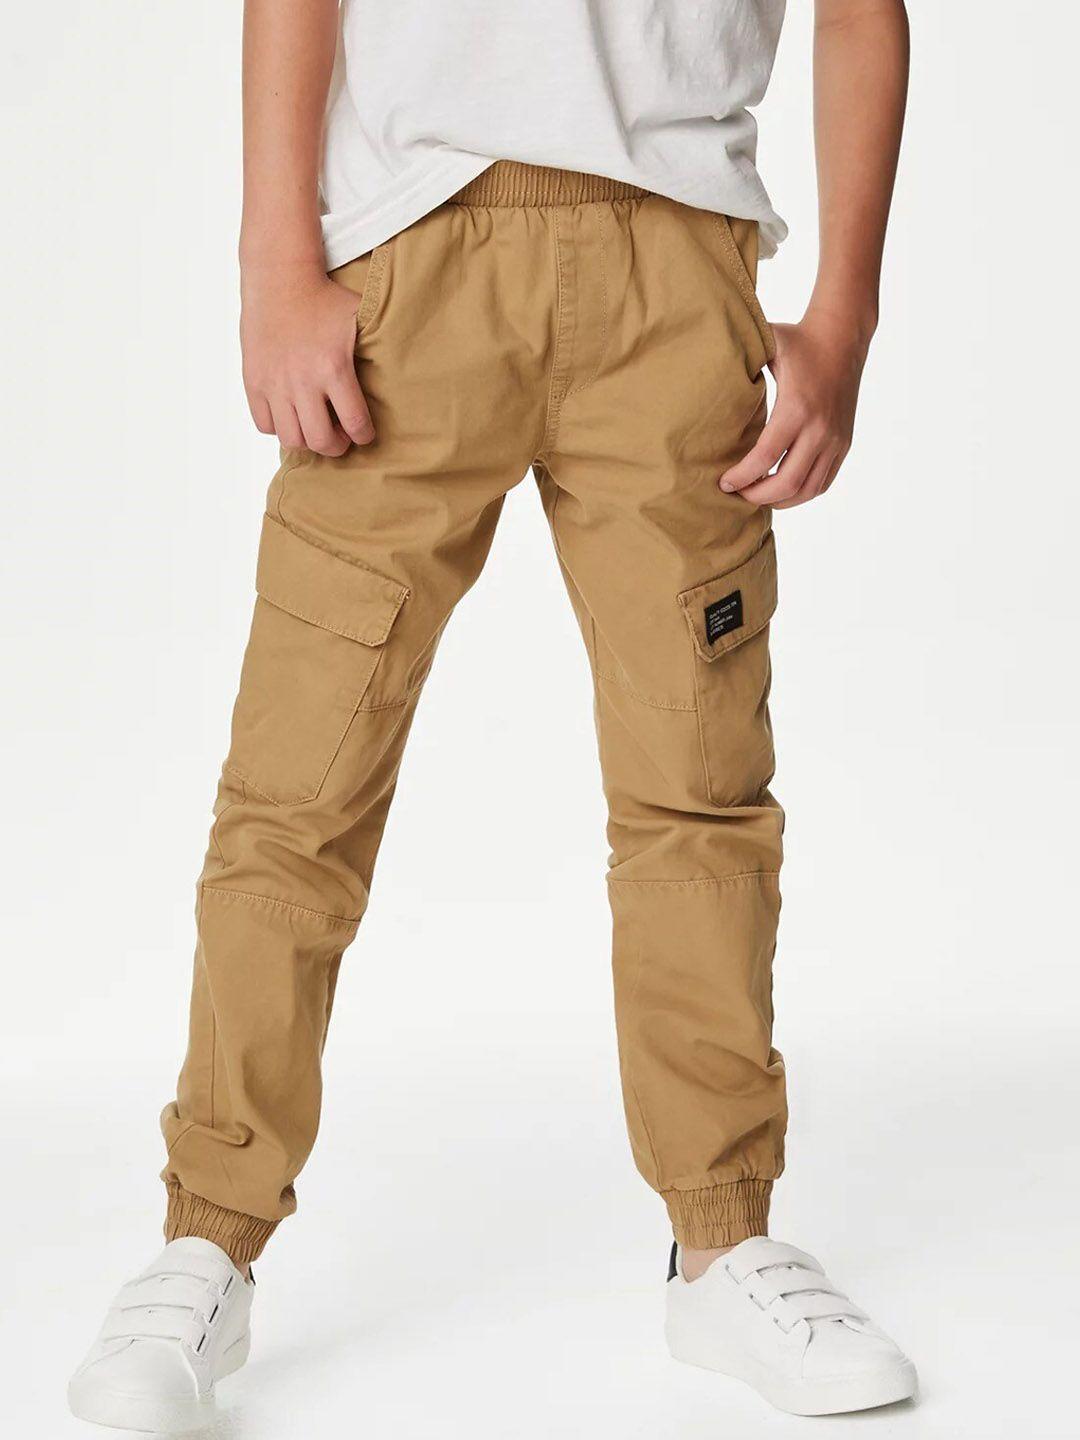 marks & spencer boys joggers trousers